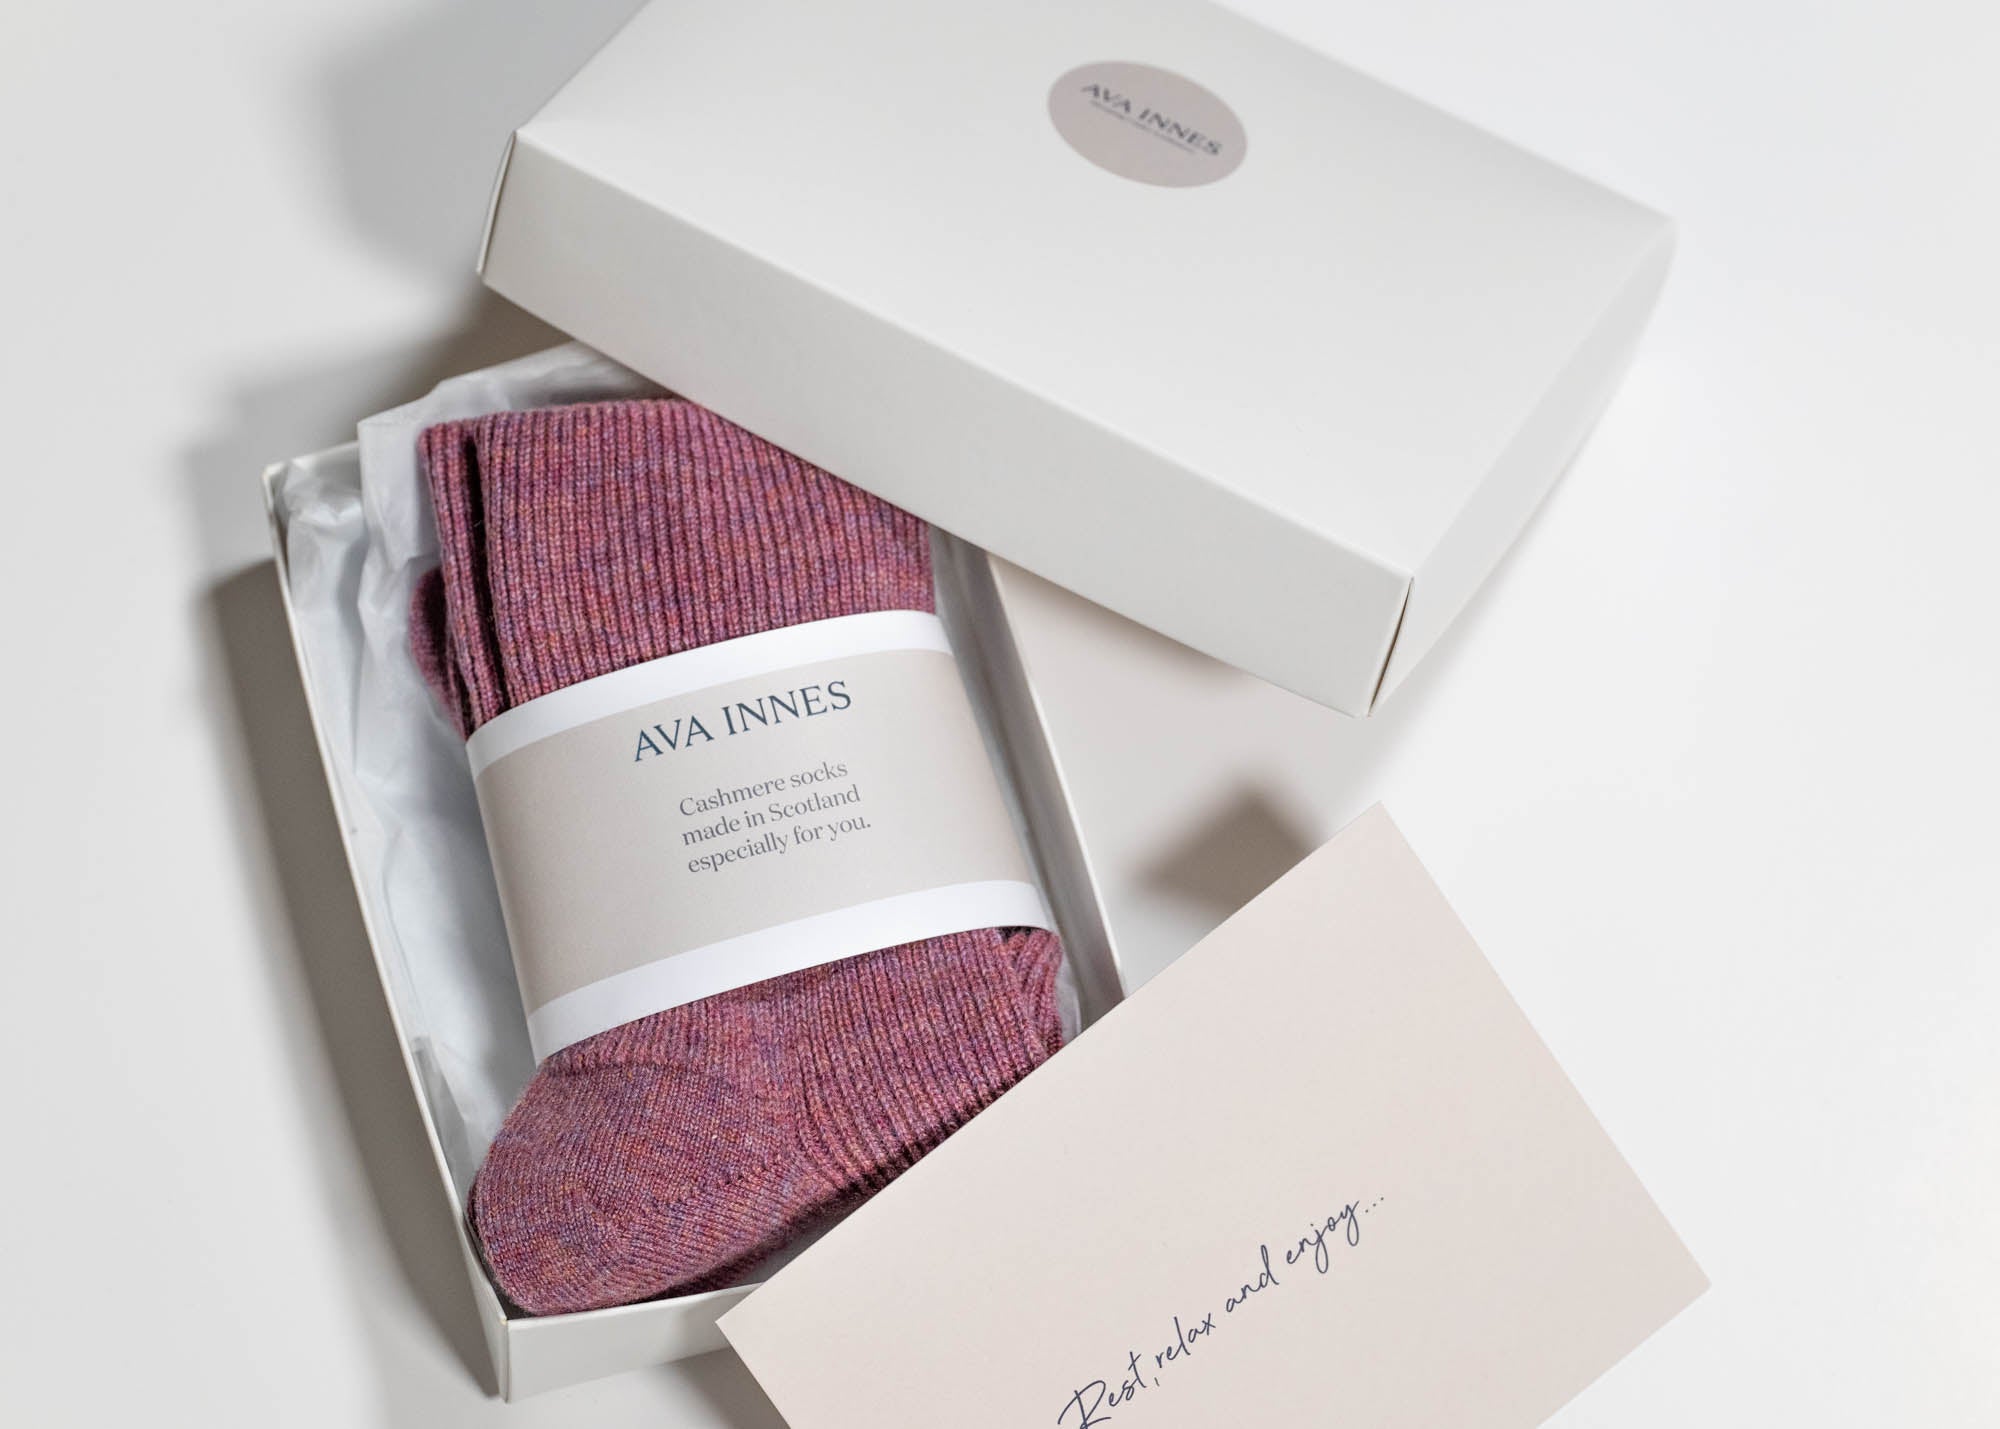 Ava Innes heather cashmere socks in a gift box made in Scotland